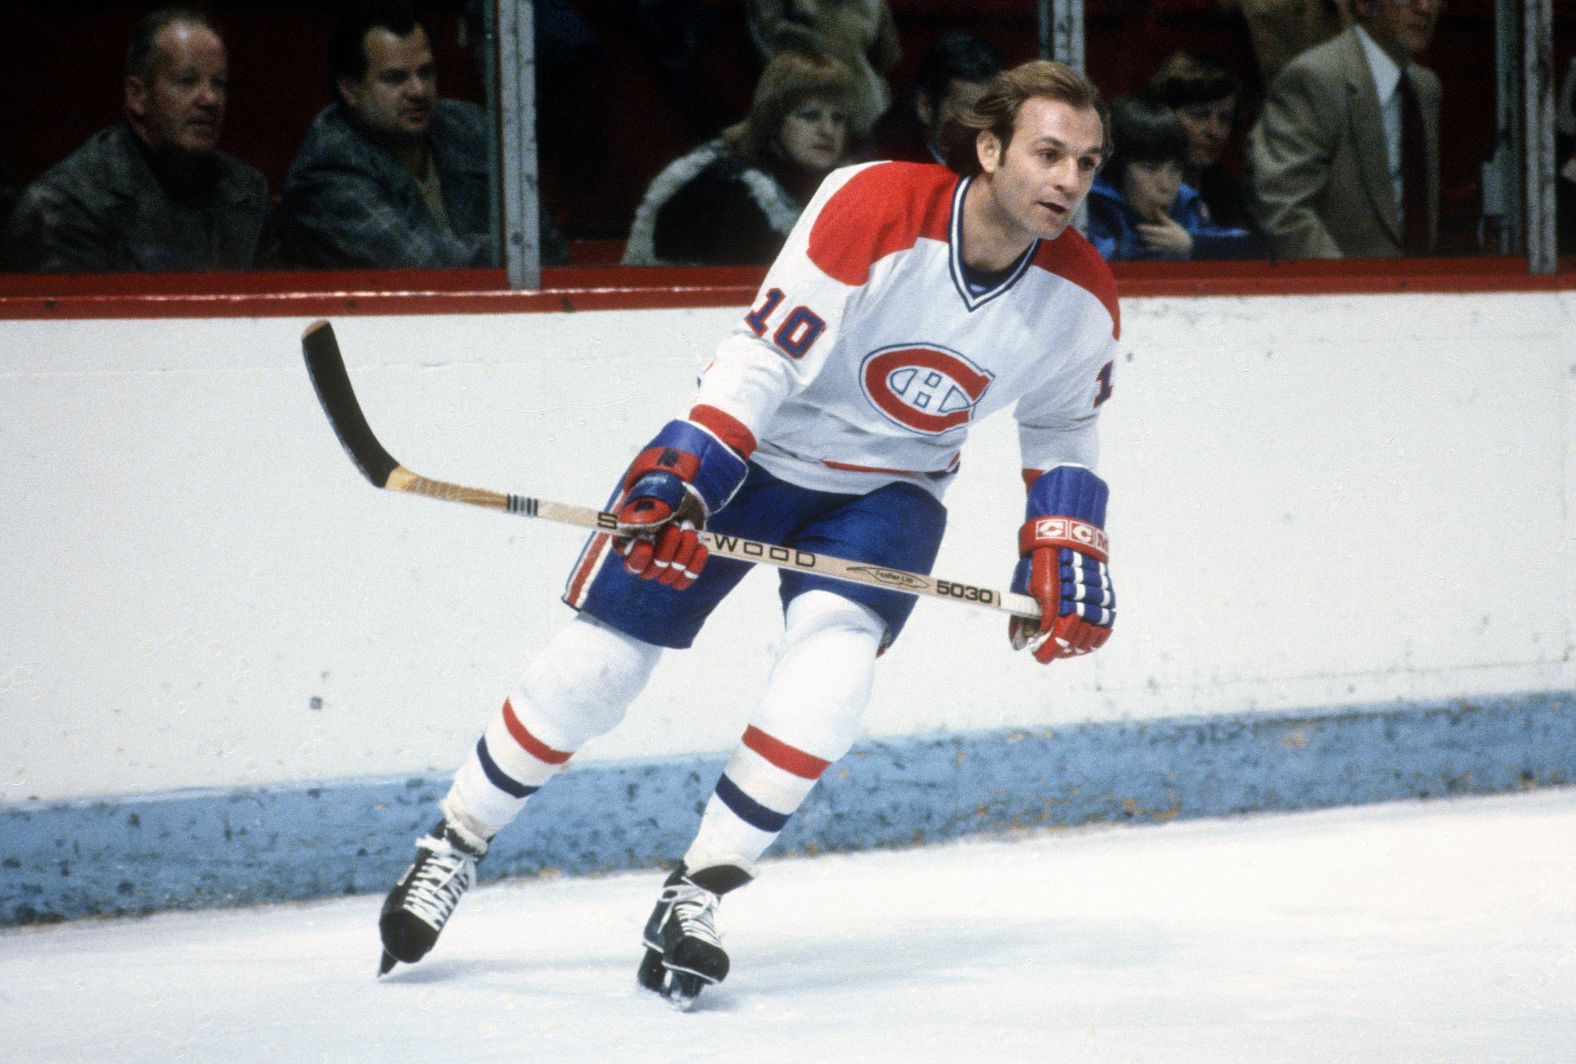 Hockey Hall of Famer <a href="index.php?page=&url=https%3A%2F%2Fwww.cnn.com%2F2022%2F04%2F22%2Fsport%2Fguy-lafleur-dies-montreal-canadiens-spt-intl%2Findex.html" target="_blank">Guy Lafleur</a> died at age 70, the Montreal Canadiens announced on April 22. Lafleur, nicknamed "The Flower," was a five-time Stanley Cup champion with the Canadiens. He scored 560 goals and had 793 assists during his NHL career.